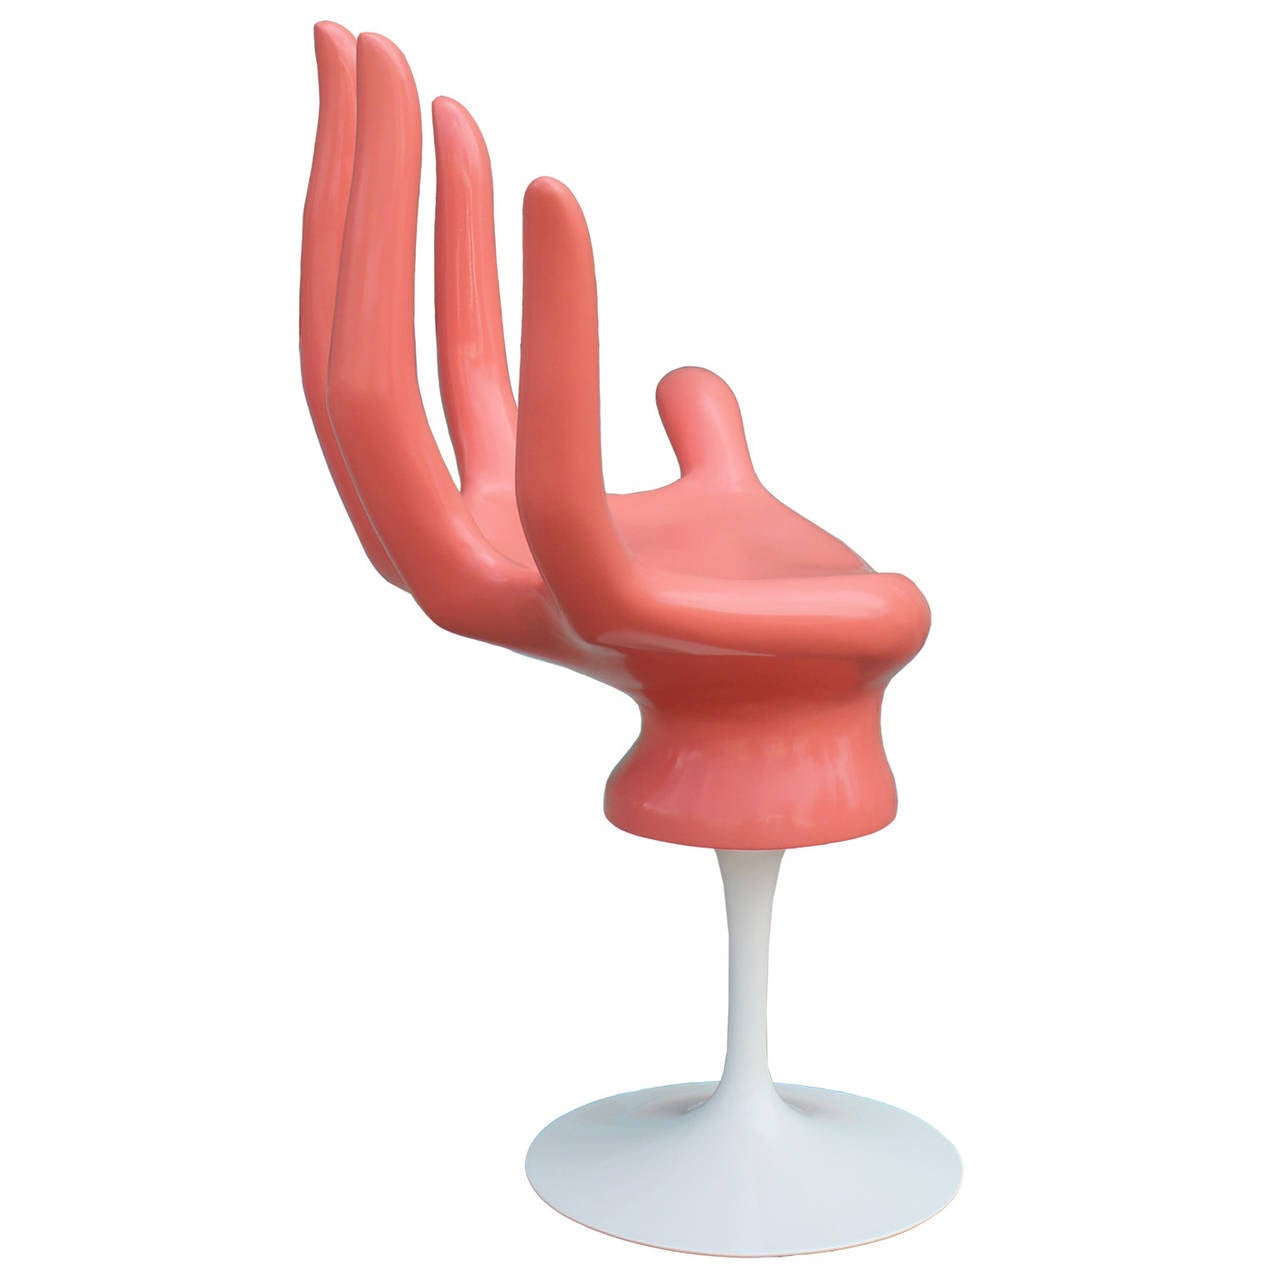 Eye-catching hand shaped swivel chair. Chair is lacquered in coral and sits upon a white lacquer tulip style base. Chair looks incredible from every angle. Great statement piece!